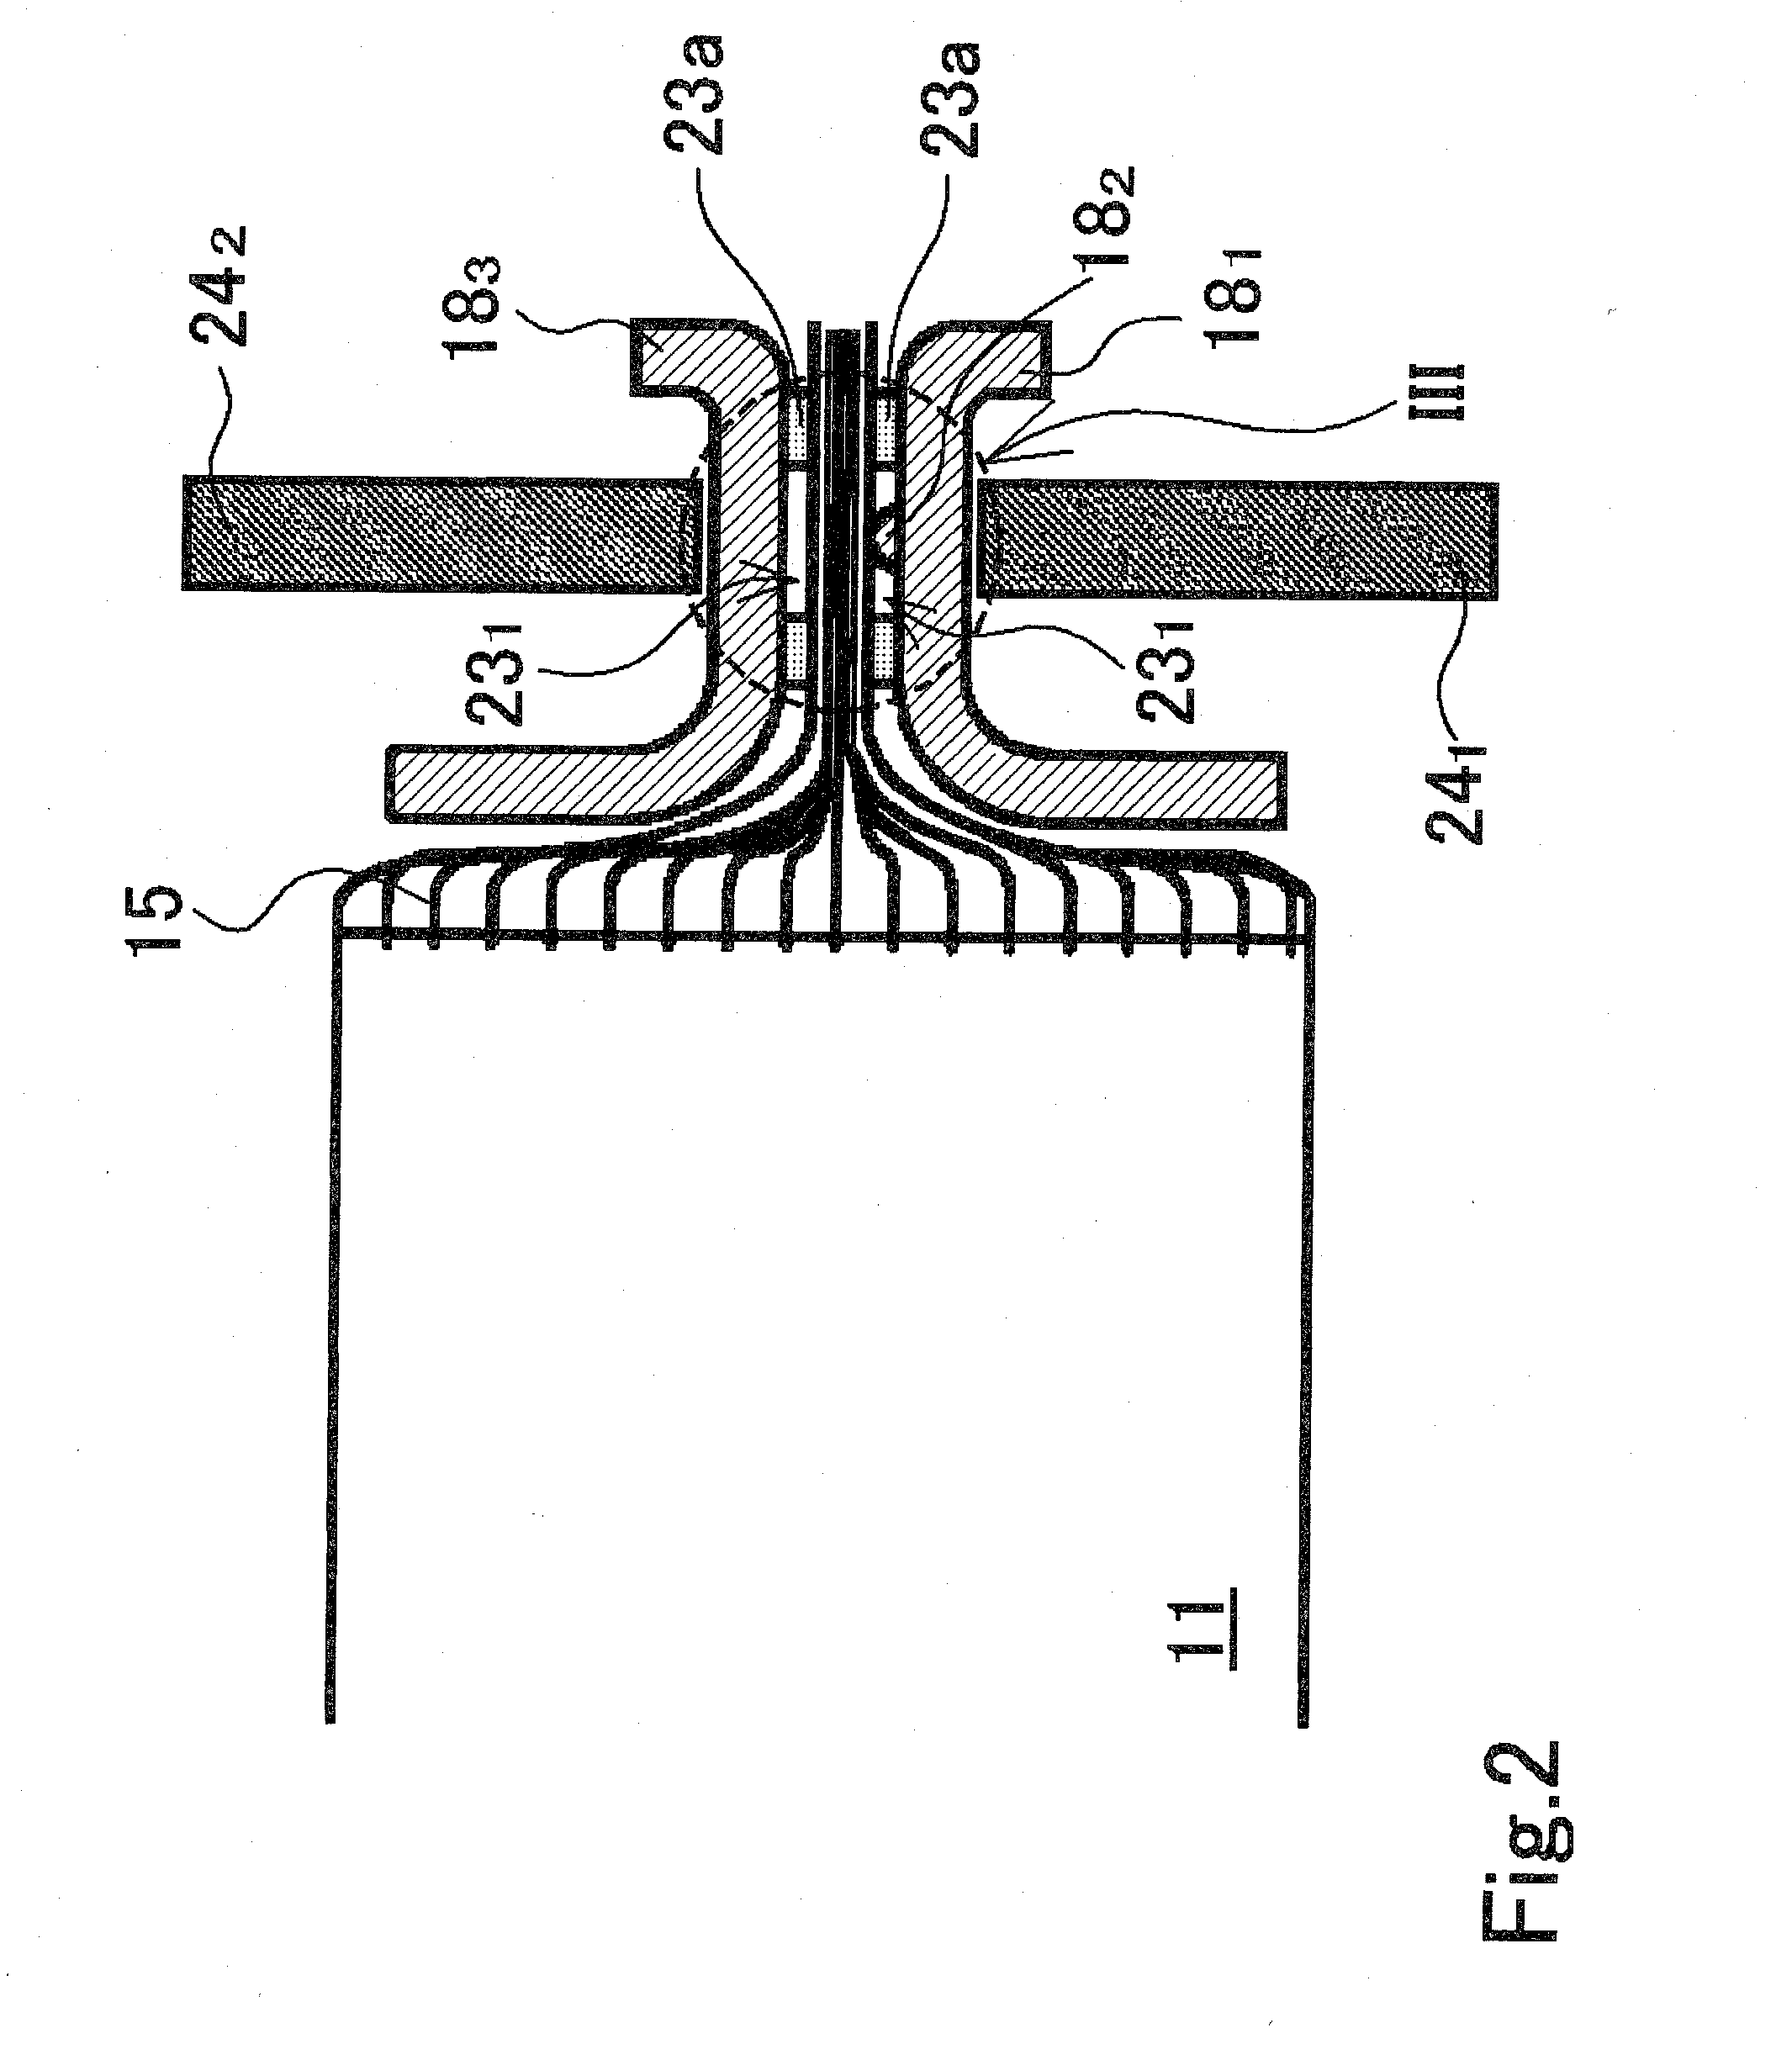 Sealed battery and manufacturing method therefor